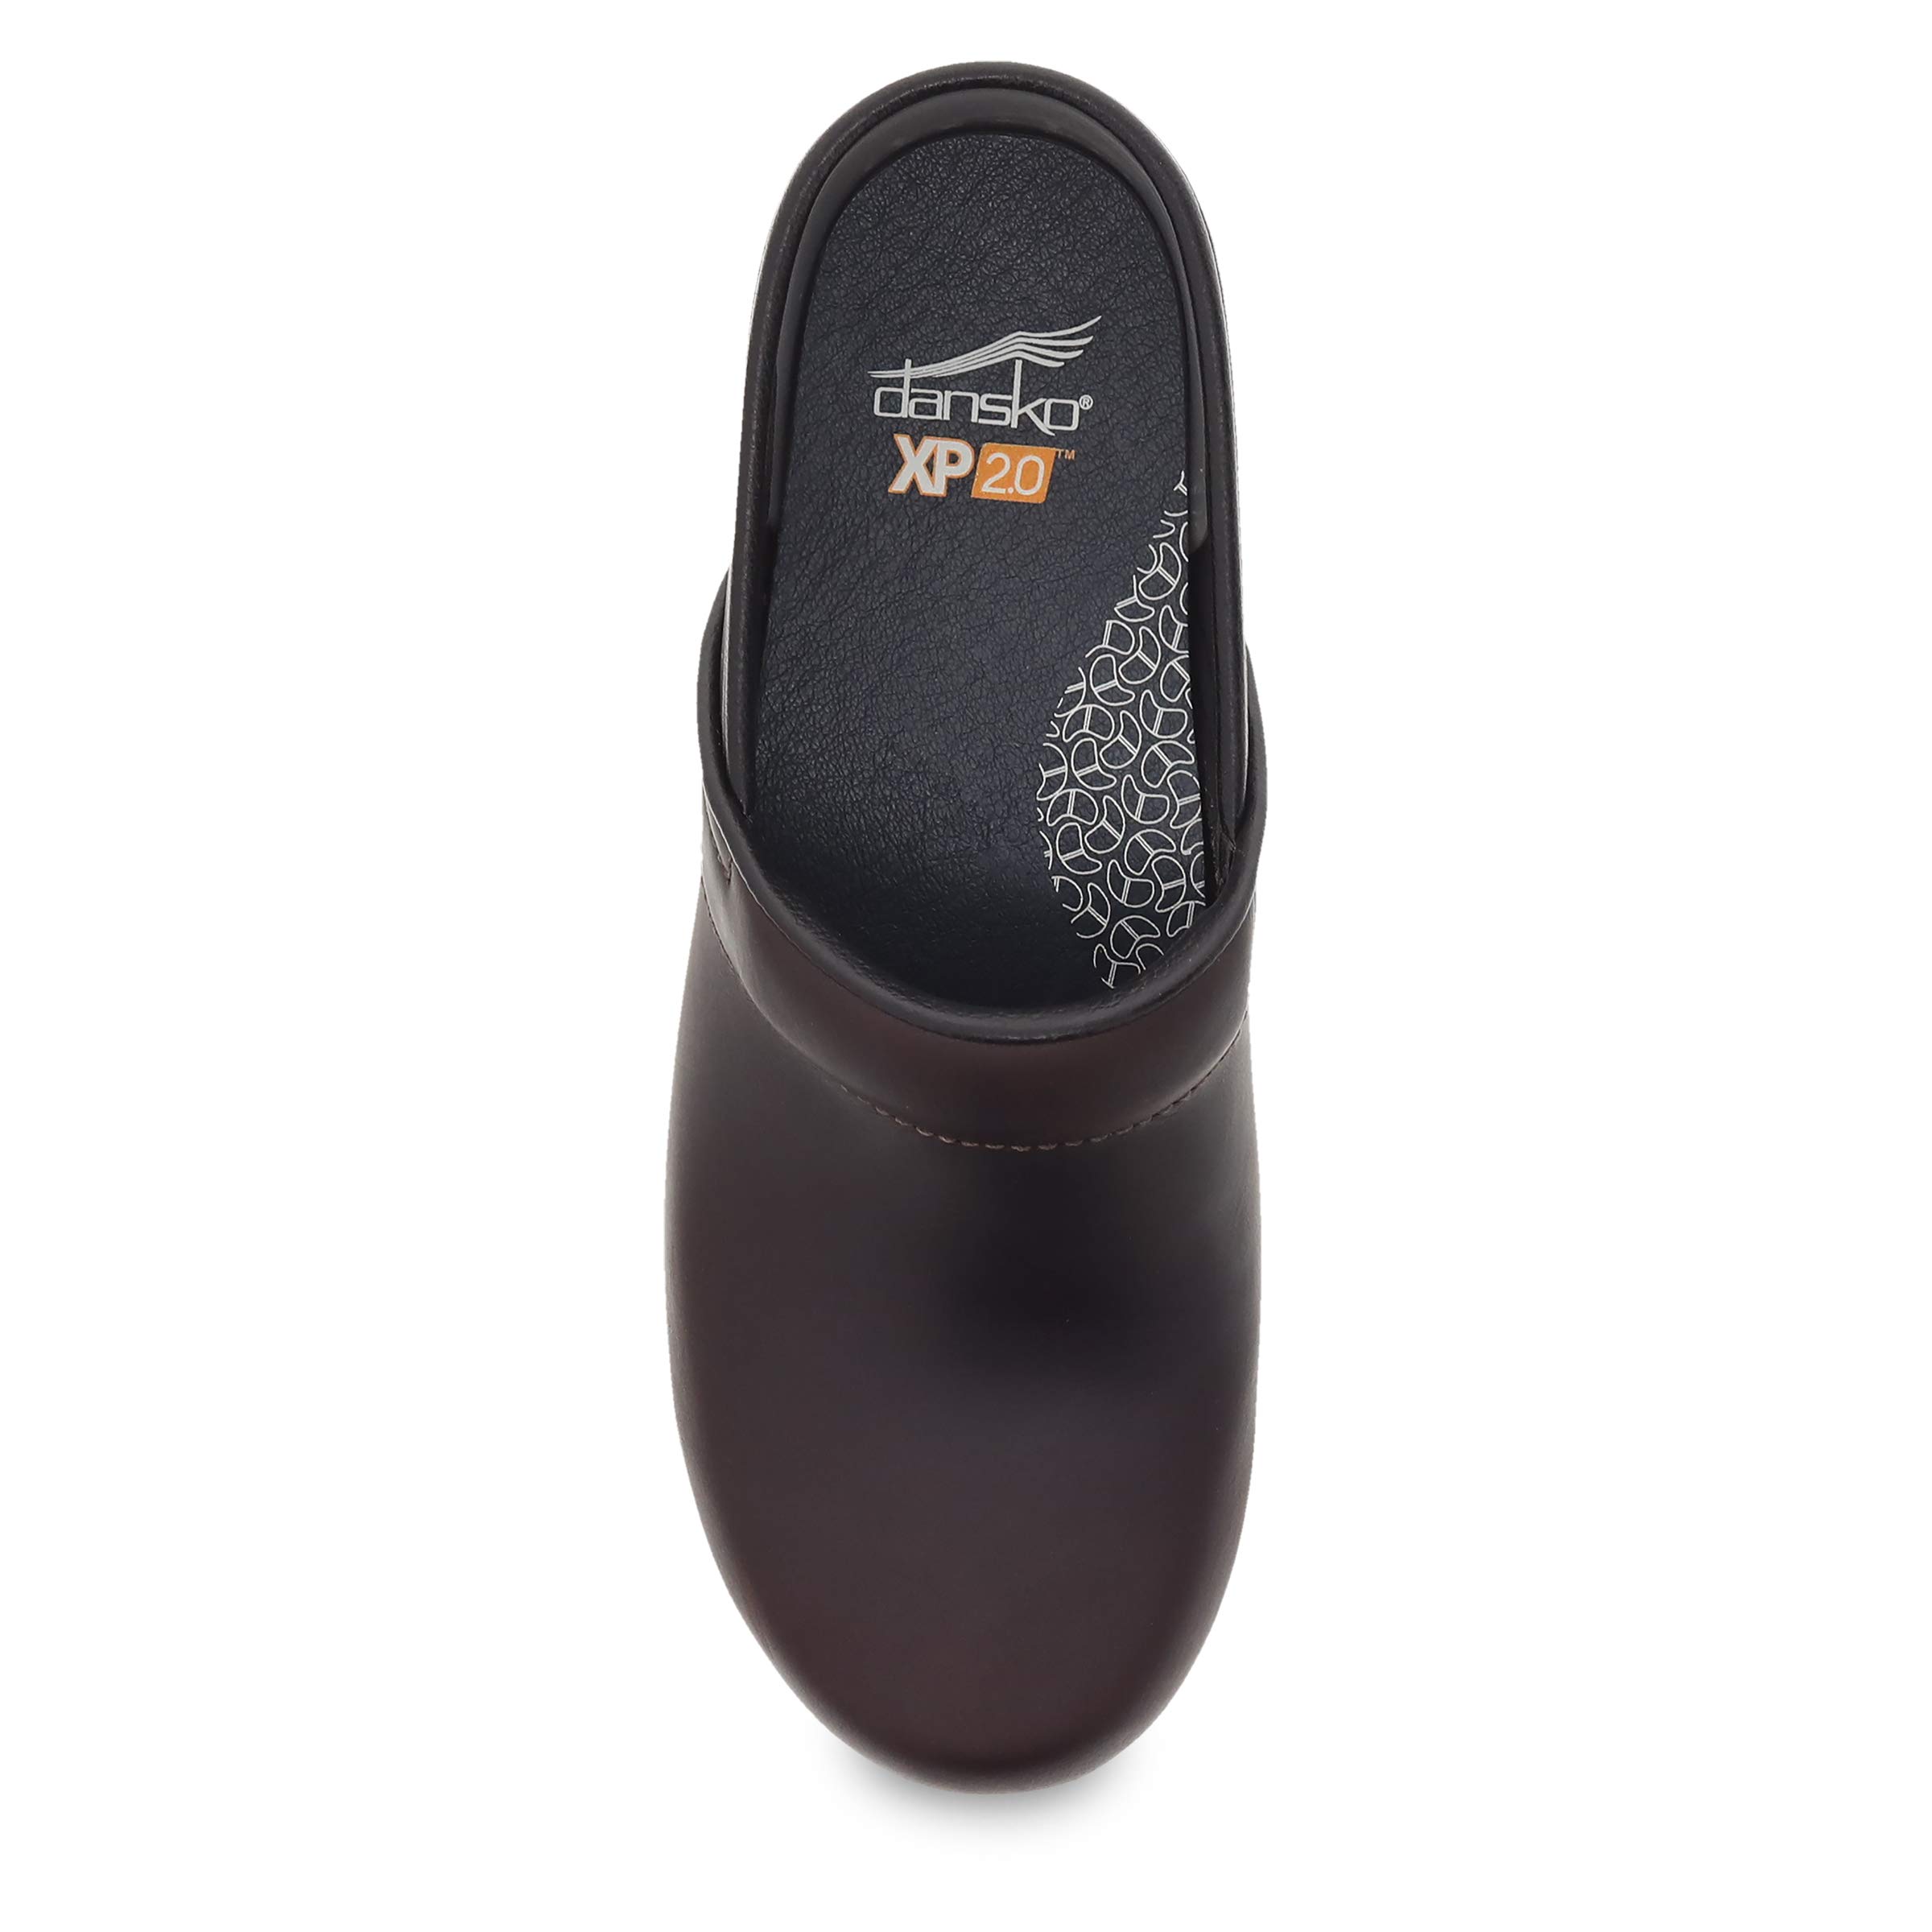 Dansko XP 2.0 Clogs for Women – Lightweight Slip Resistant Footwear for Comfort and Support – Ideal for Long Standing Professionals – Nursing, Veterinarians, Food Service, Healthcare Professionals